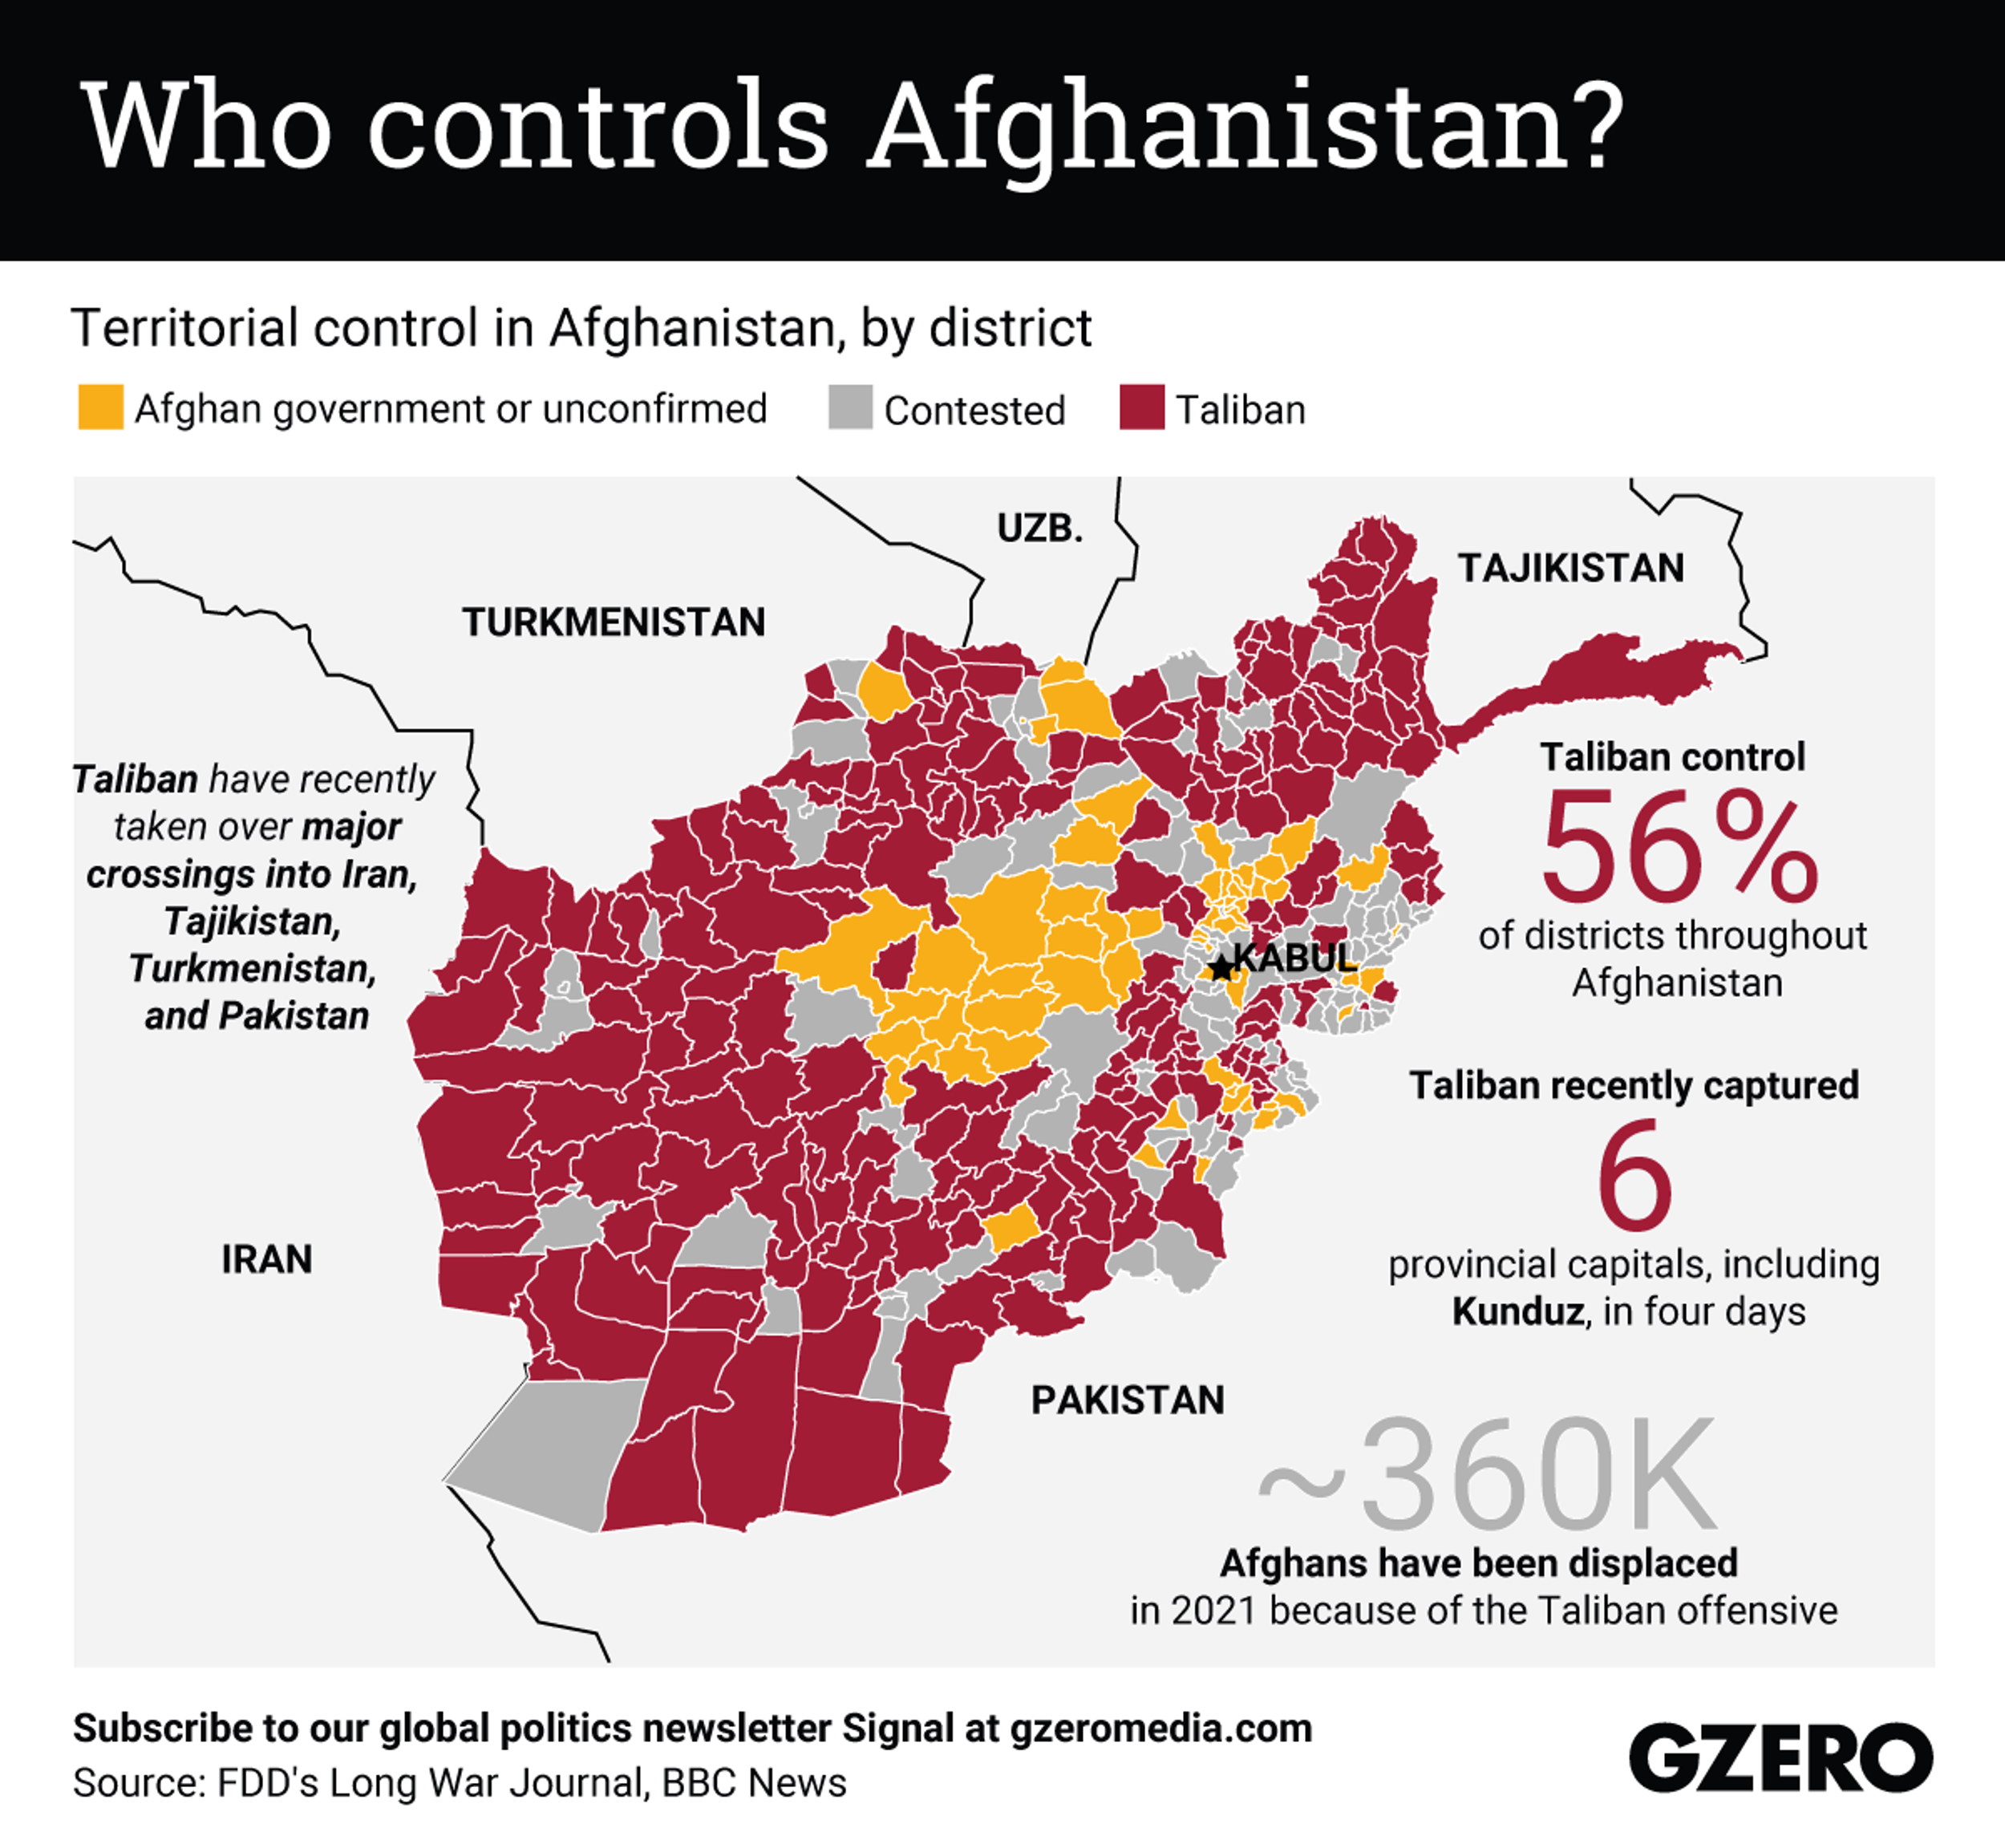 The Graphic Truth: Who controls Afghanistan?